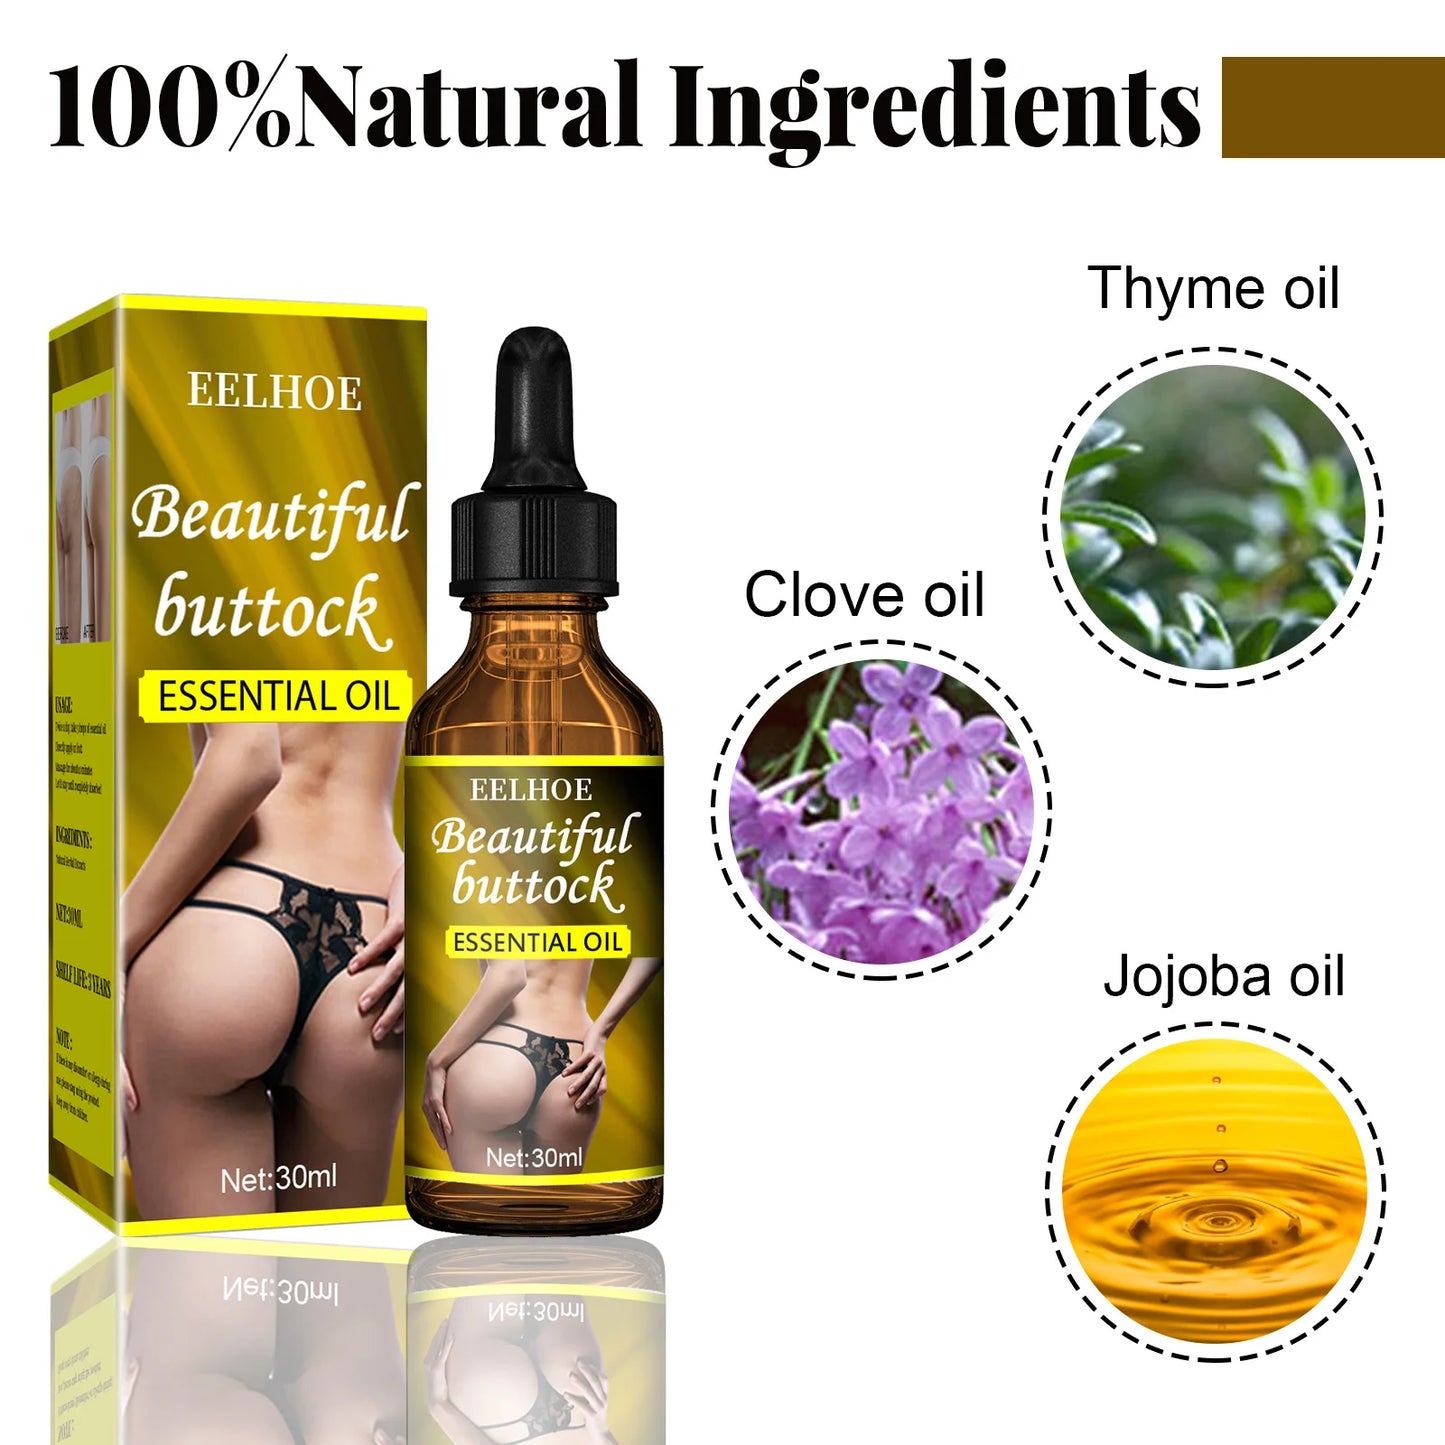 Hip and Buttock Essential Oils for Fast Growth, Butt Enhancer, Breast Enlargement, Sexy Body Care for Women.